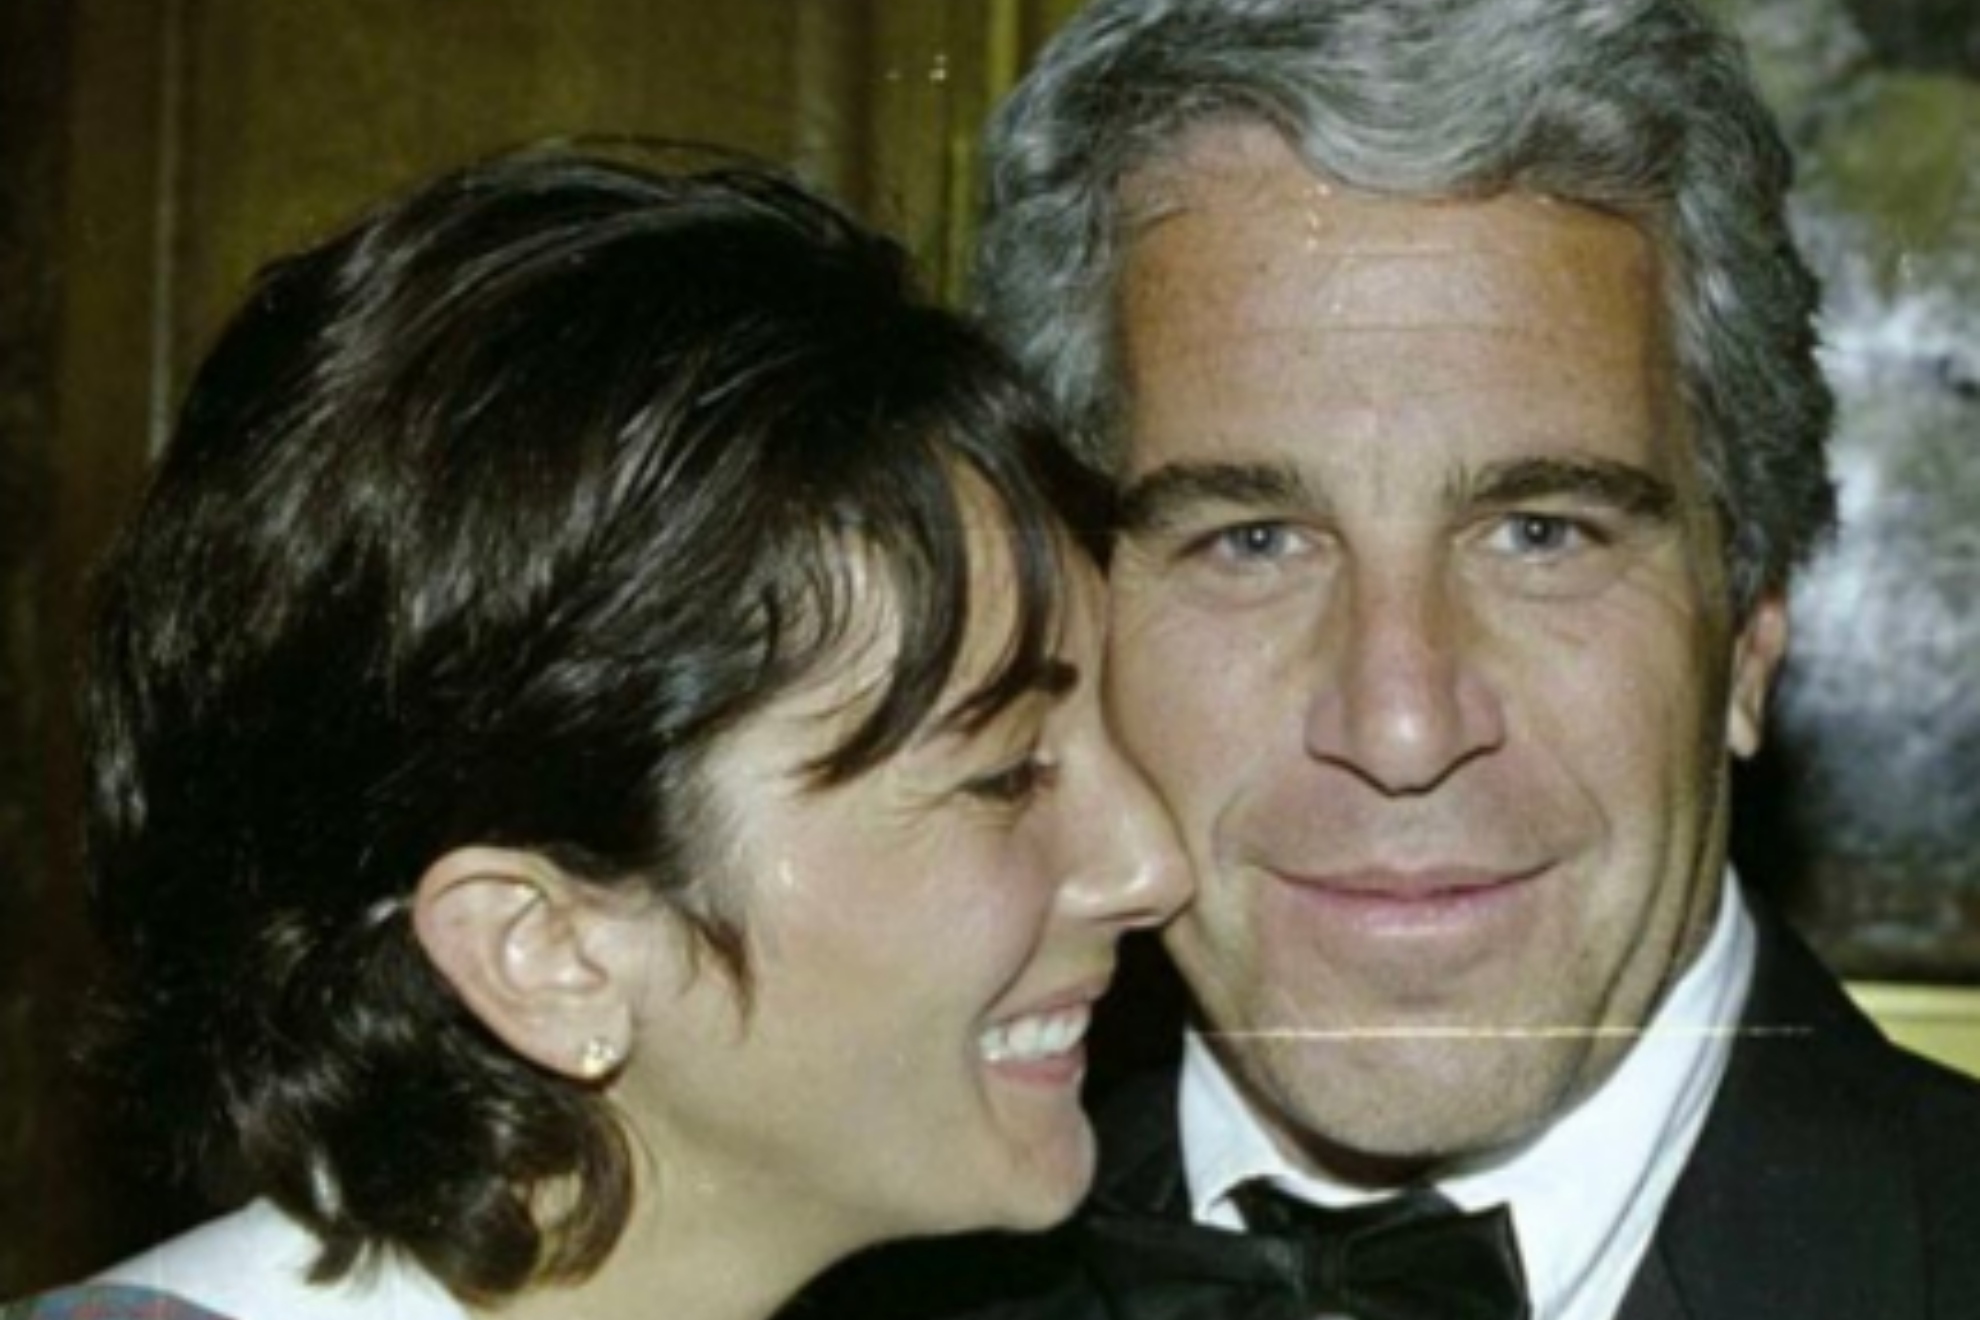 Ghislaine Maxwell claims Prince Andrew and Virginia Giuffre never met and the picture is photoshopped